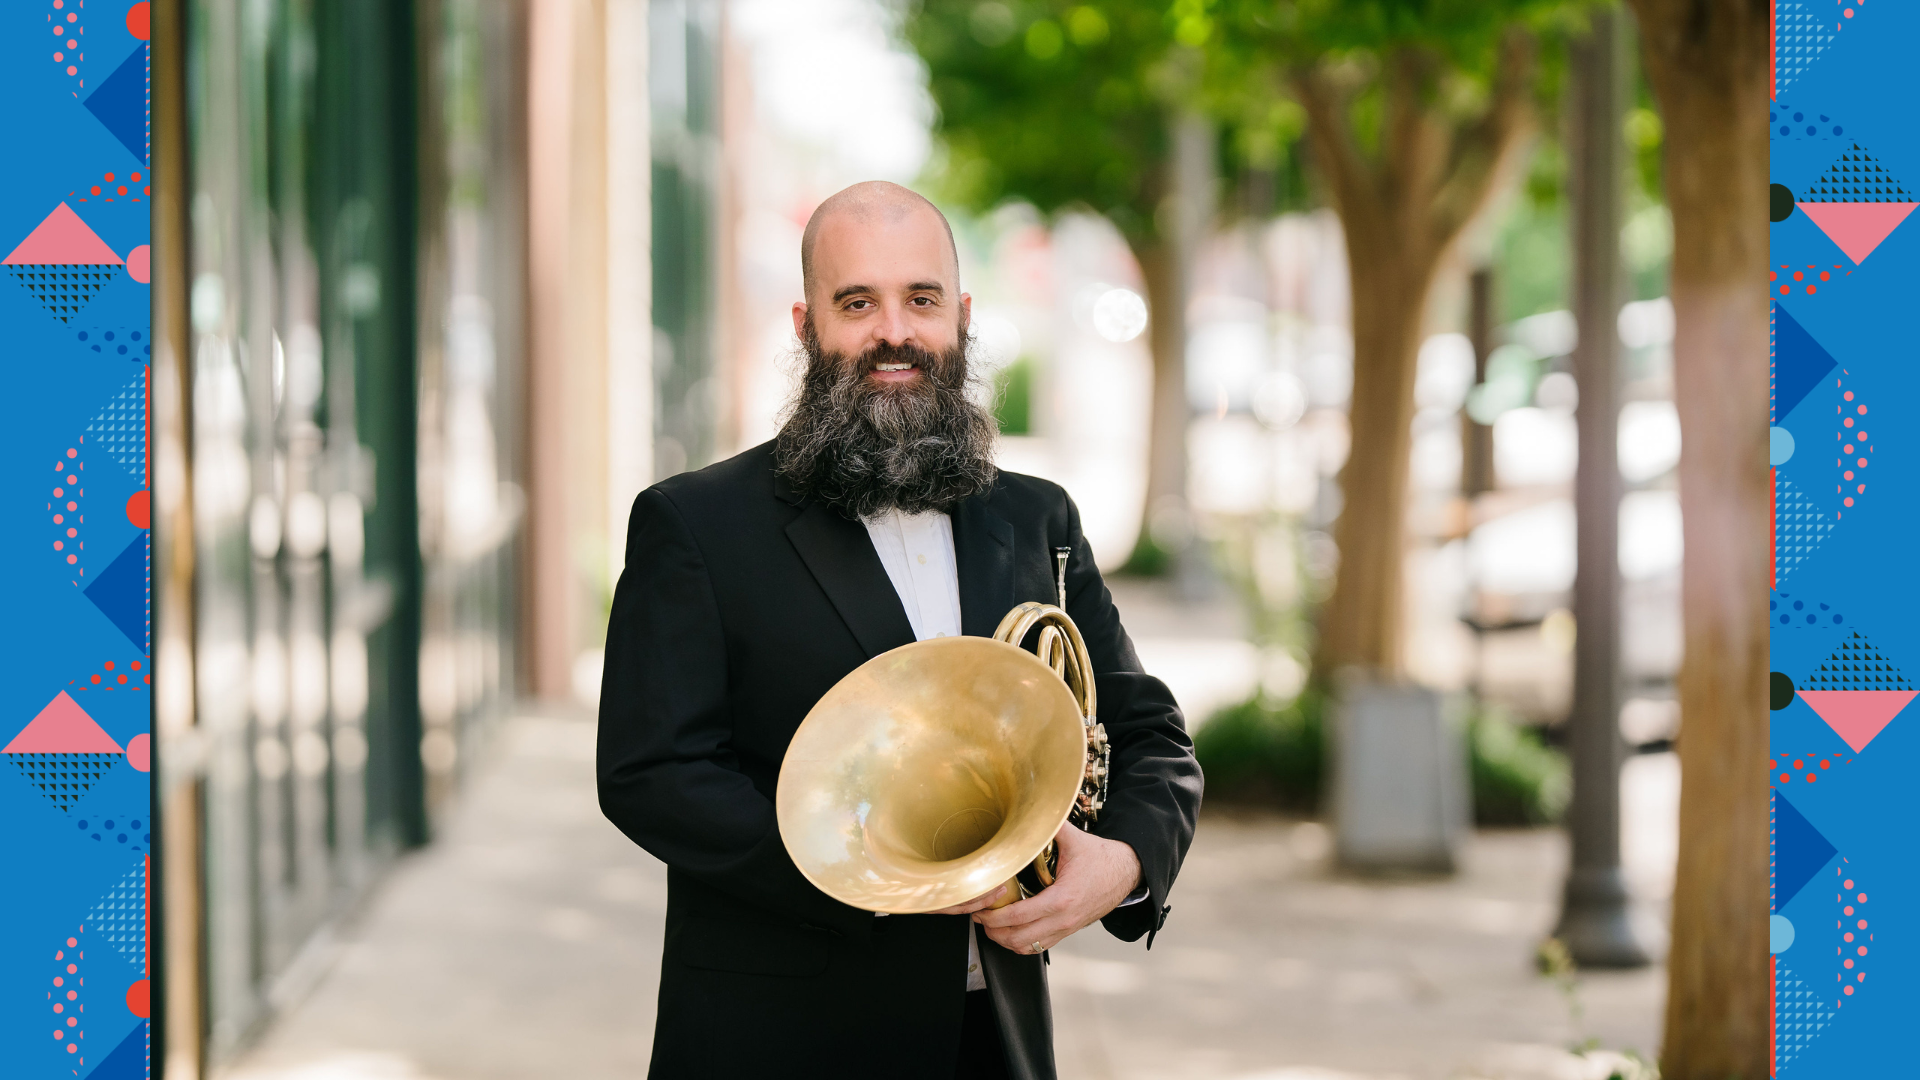 Rob Detjen in a suit holding a french horn outside on the sidewalk with trees and a building in the background.